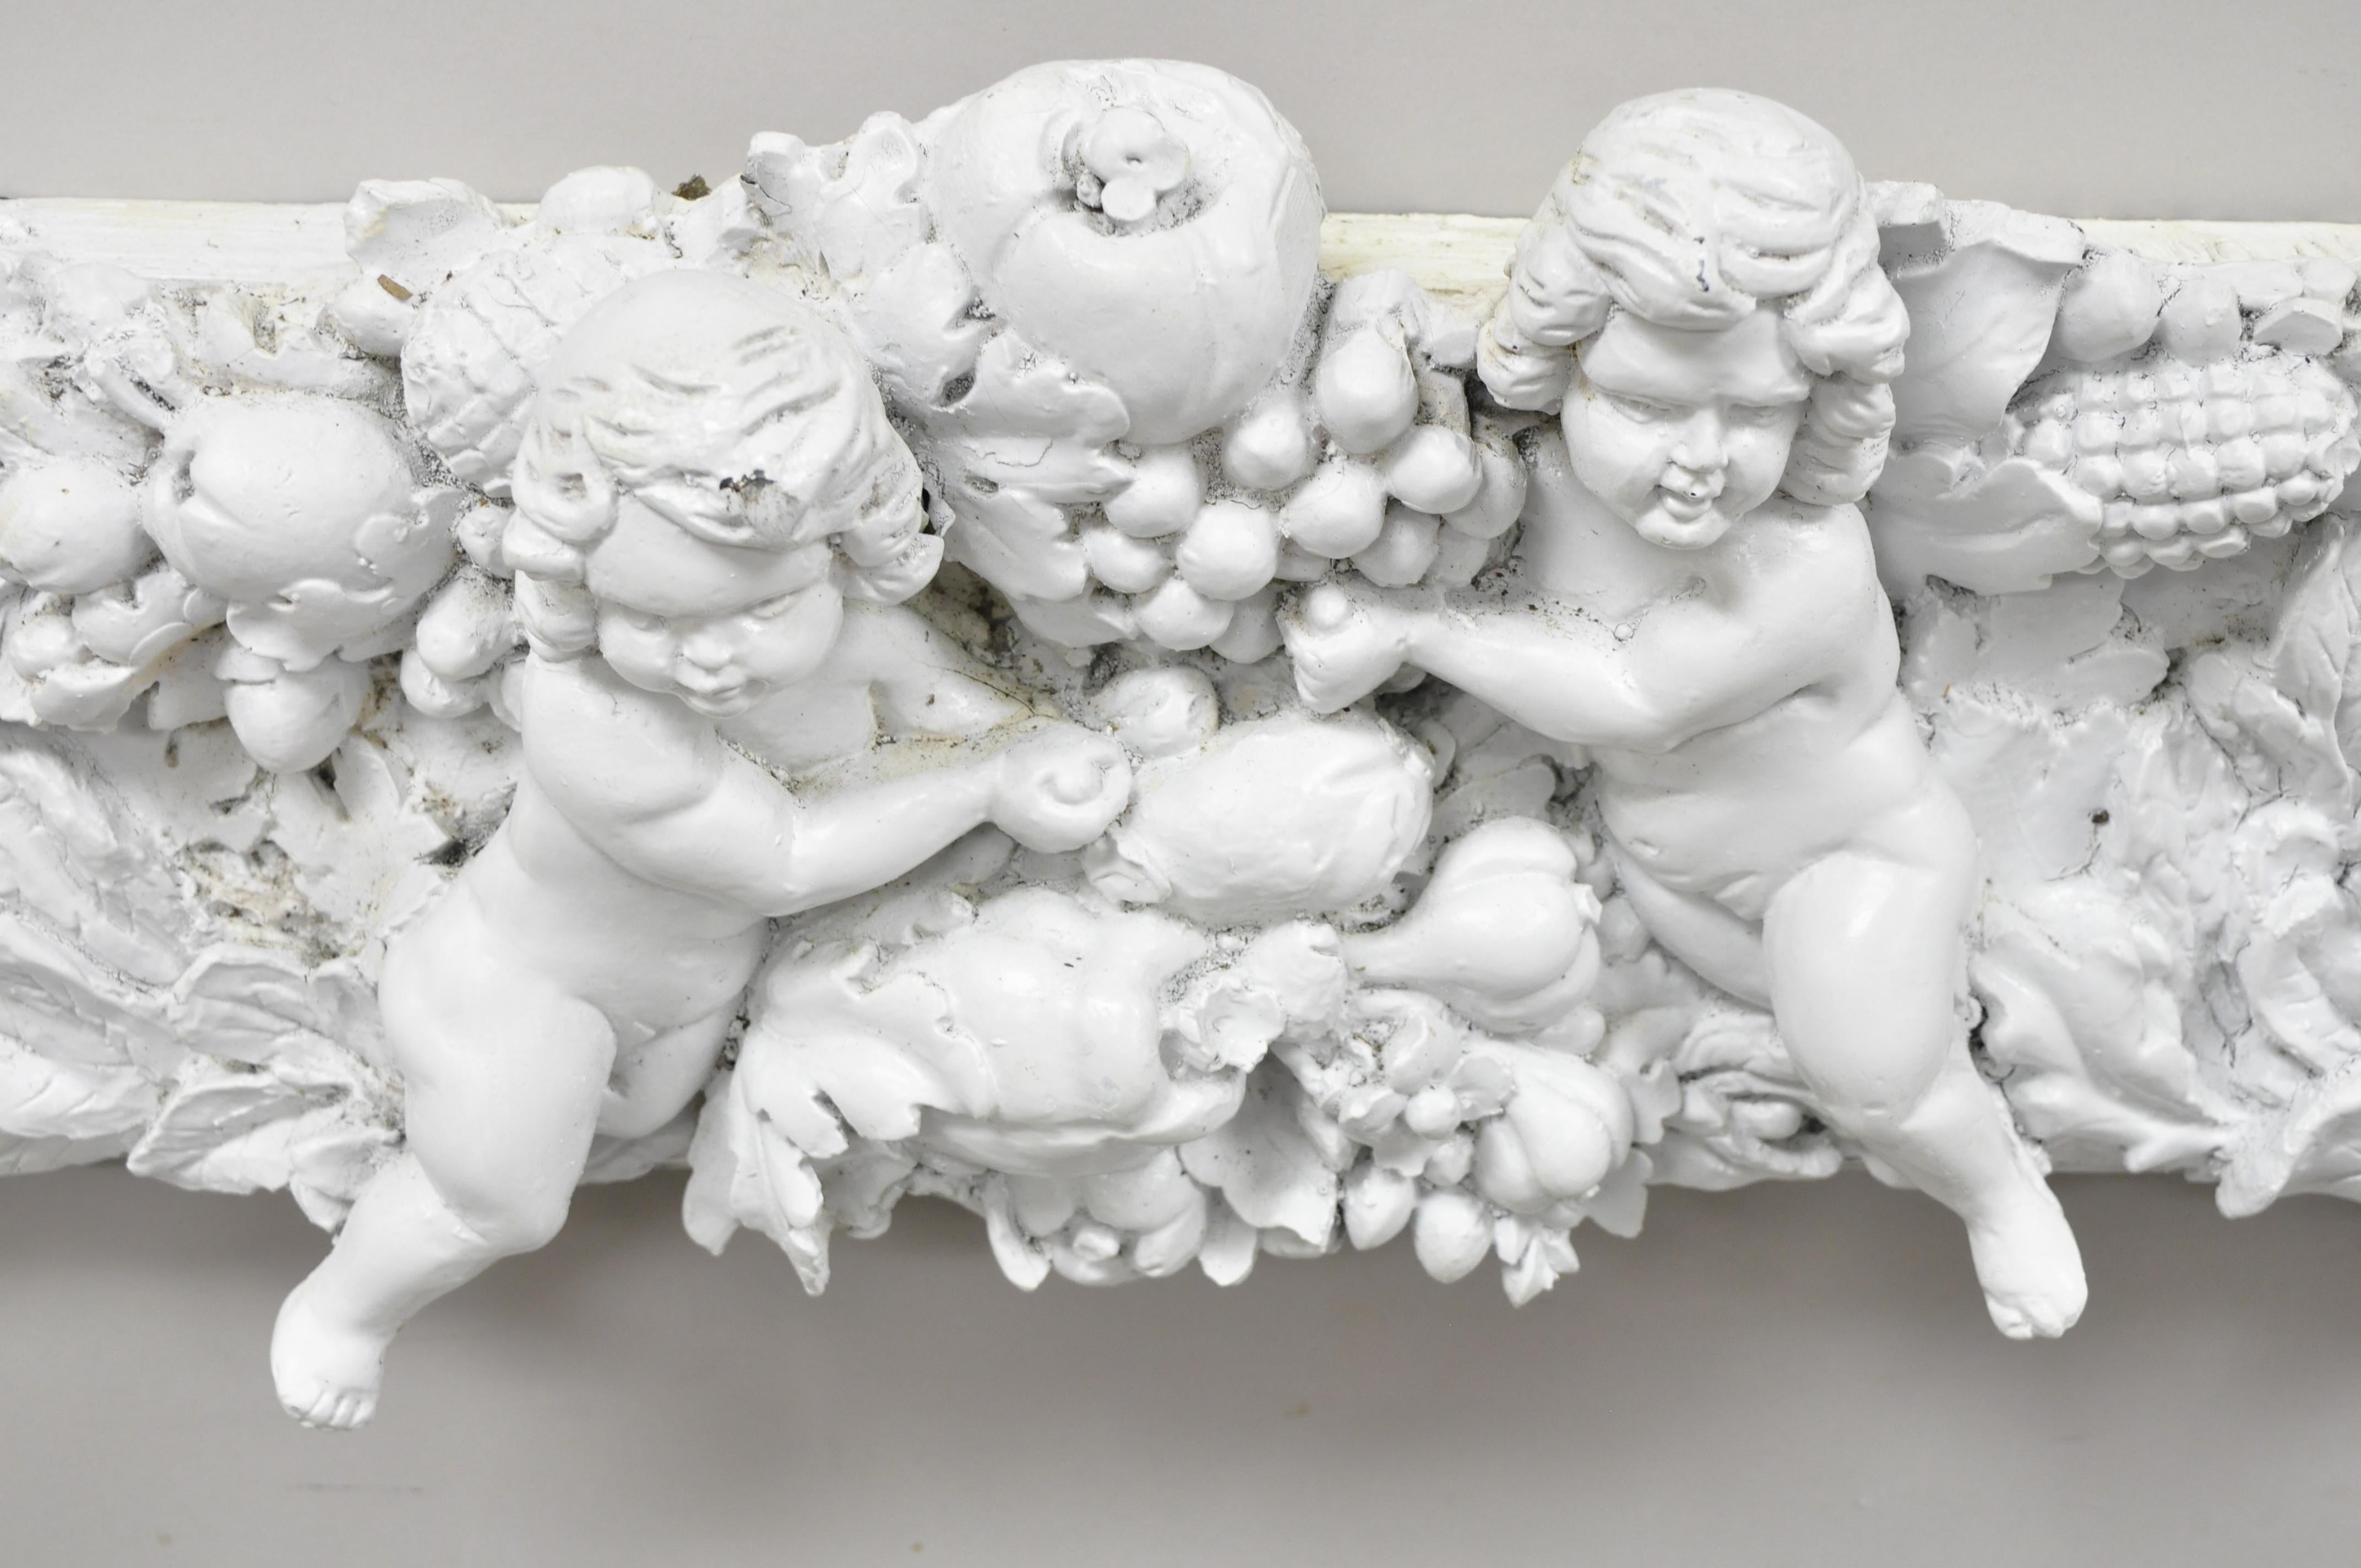 Finesse Original Rococo figural cherub grapevine large fiberglass art frame. Item features multiple cherub angels surrounding frame, flowers and leaves, fruit and vines, frame made of molded cast fiberglass, very nice vintage item, great style and